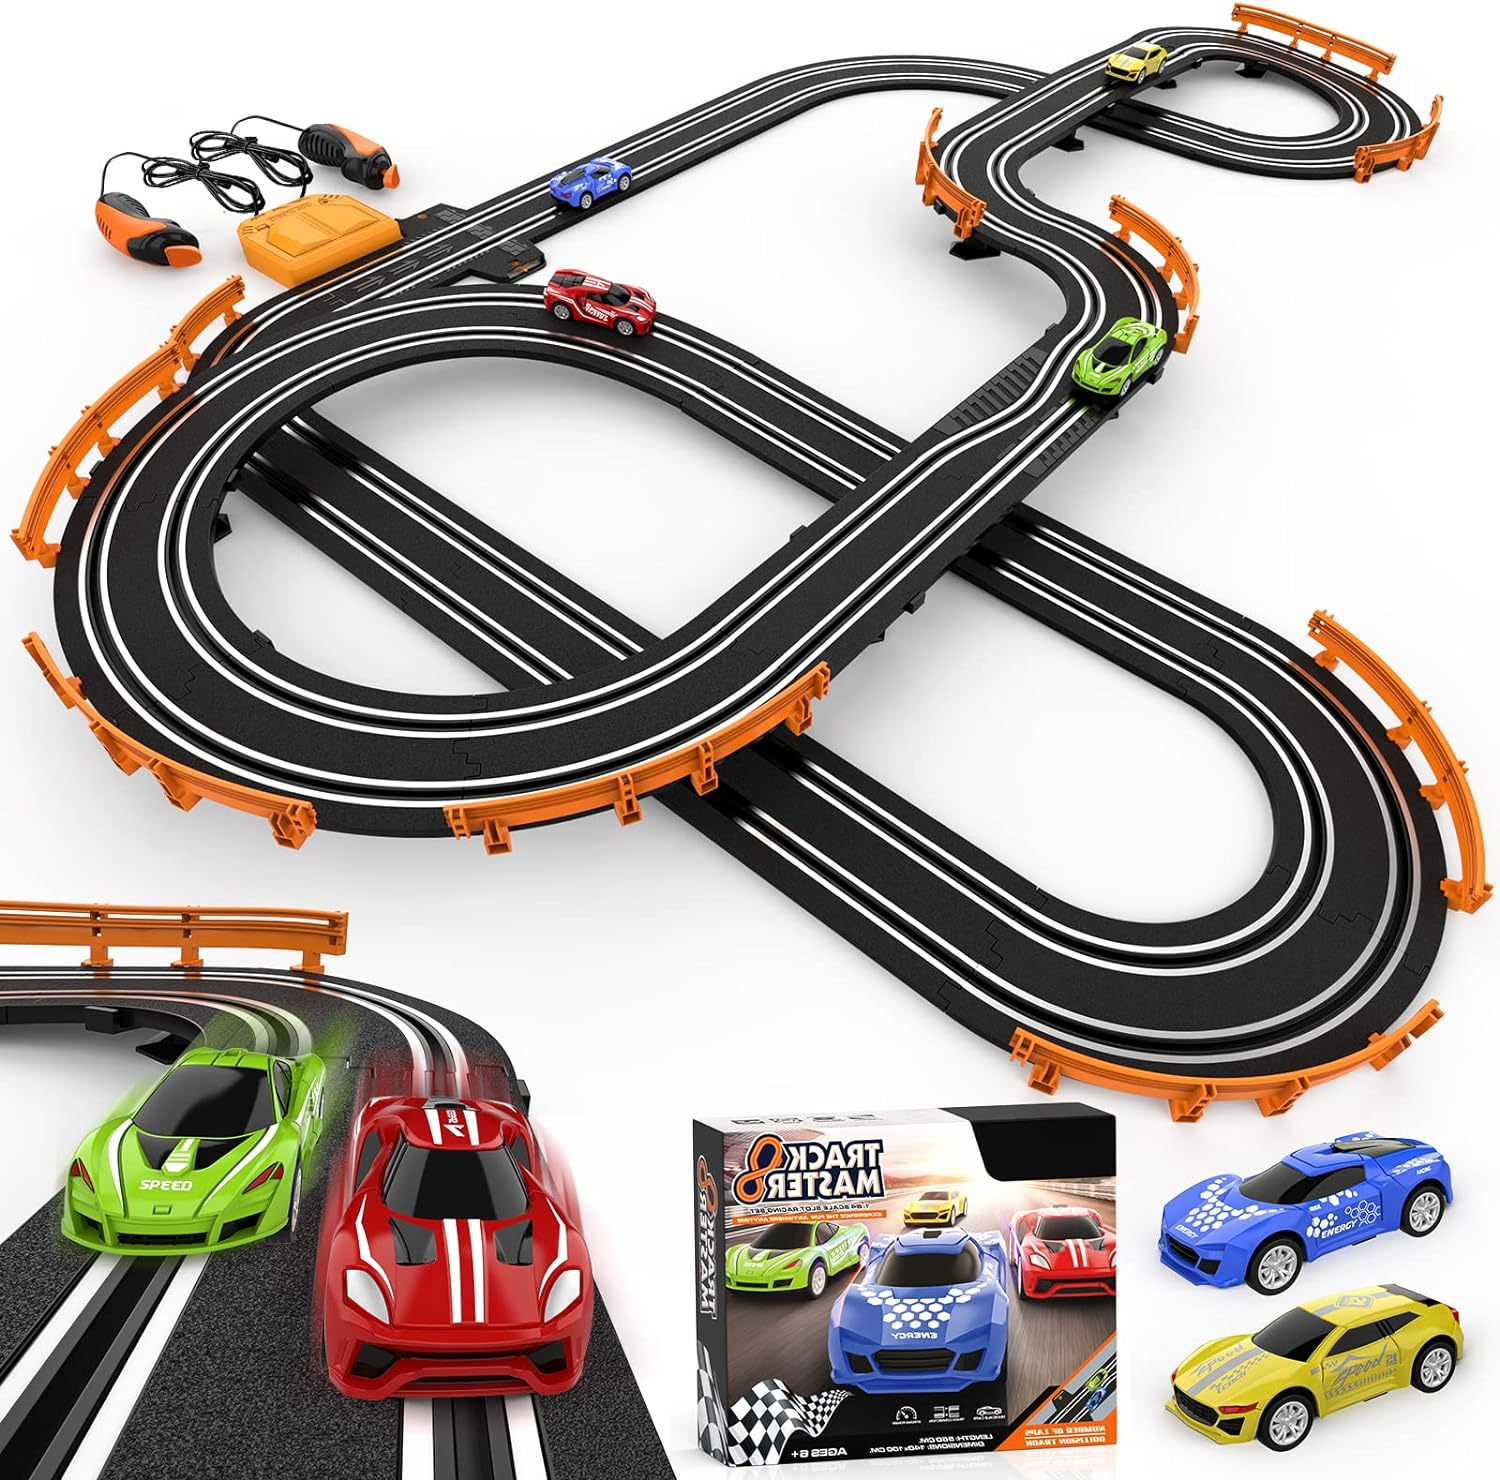 Read more about the article Wupuaait Slot Car Race Track Sets Review